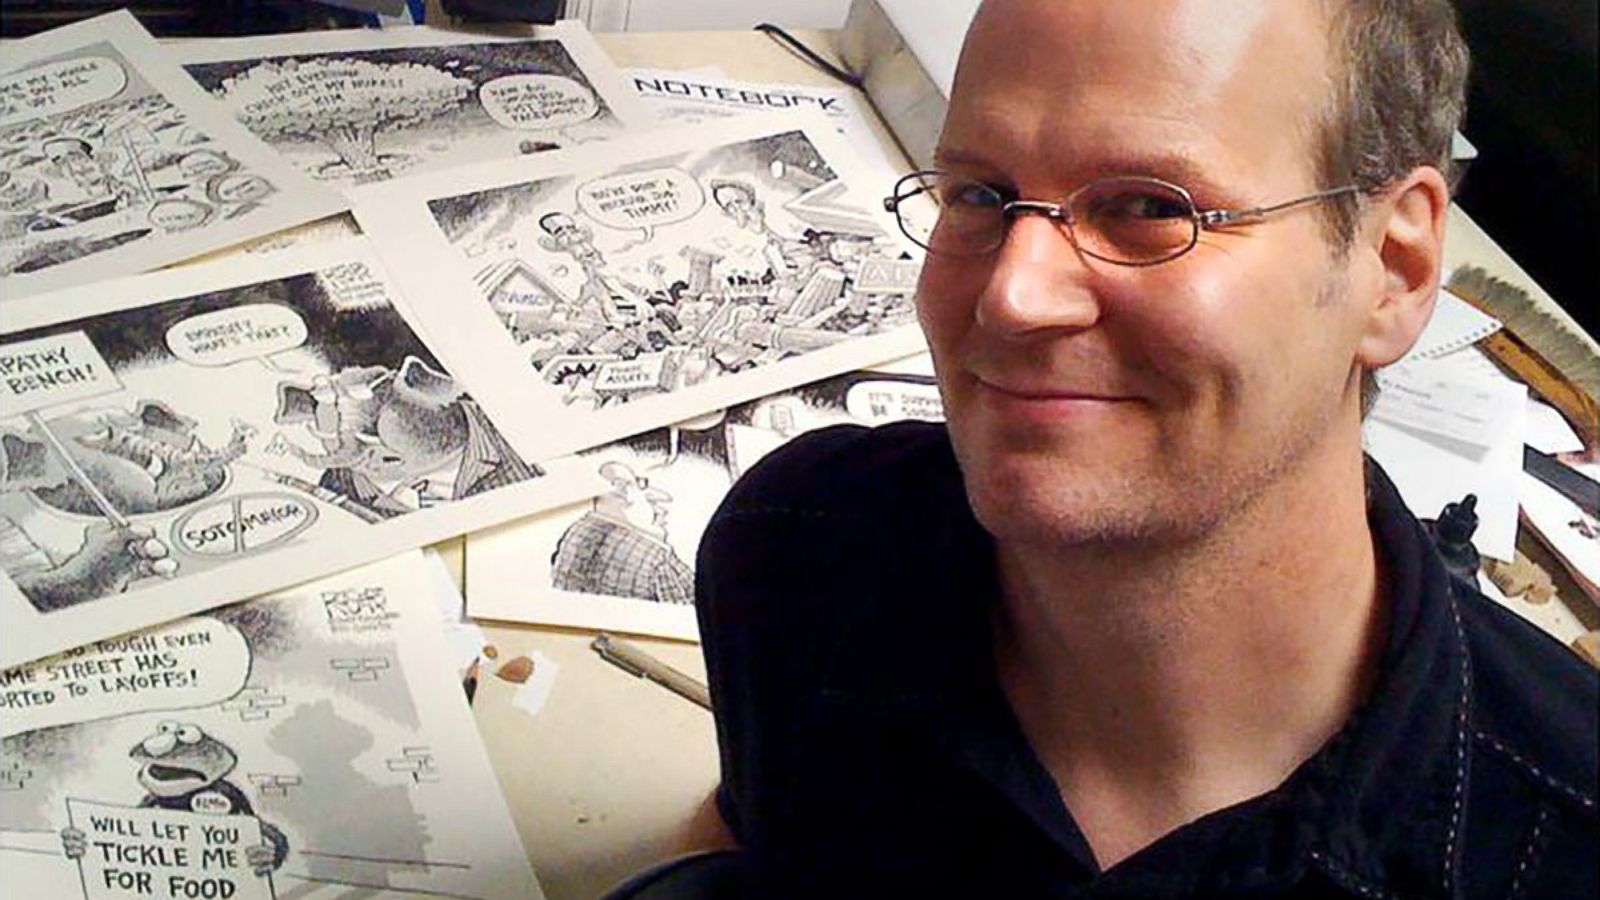 Cartoonist fired for being critical of Trump: 'They've not silenced me' -  ABC News